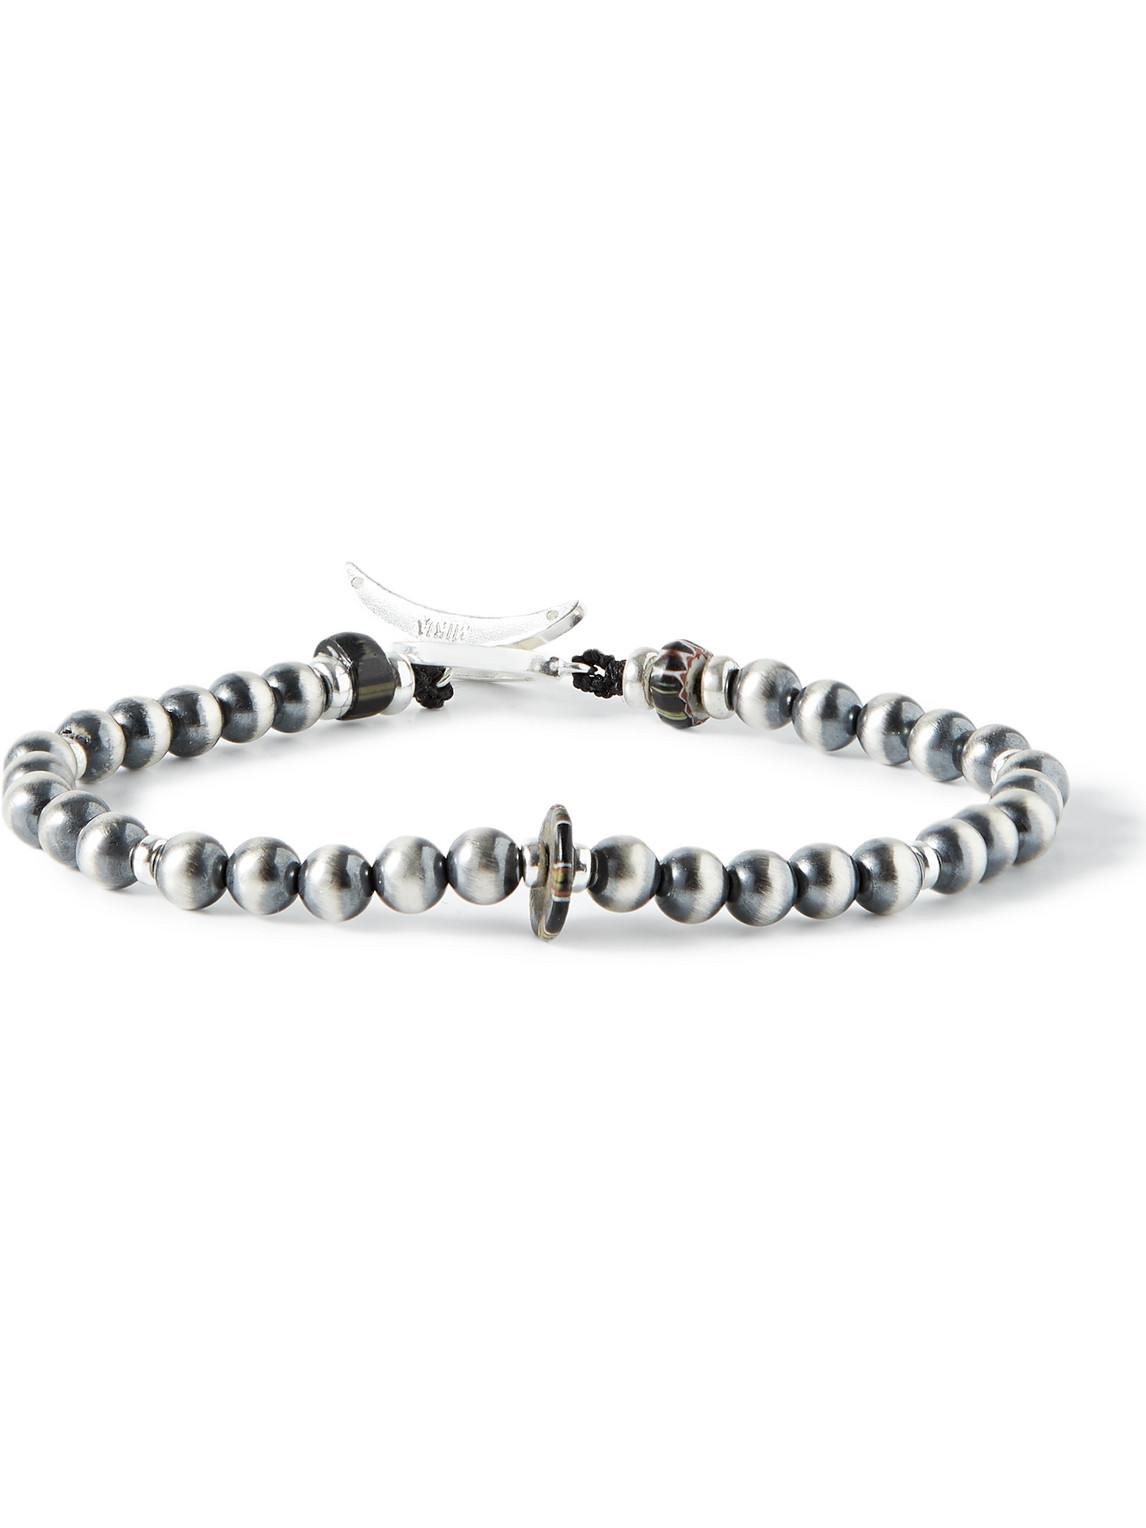 Mikia Sterling Silver And Glass Beaded Bracelet